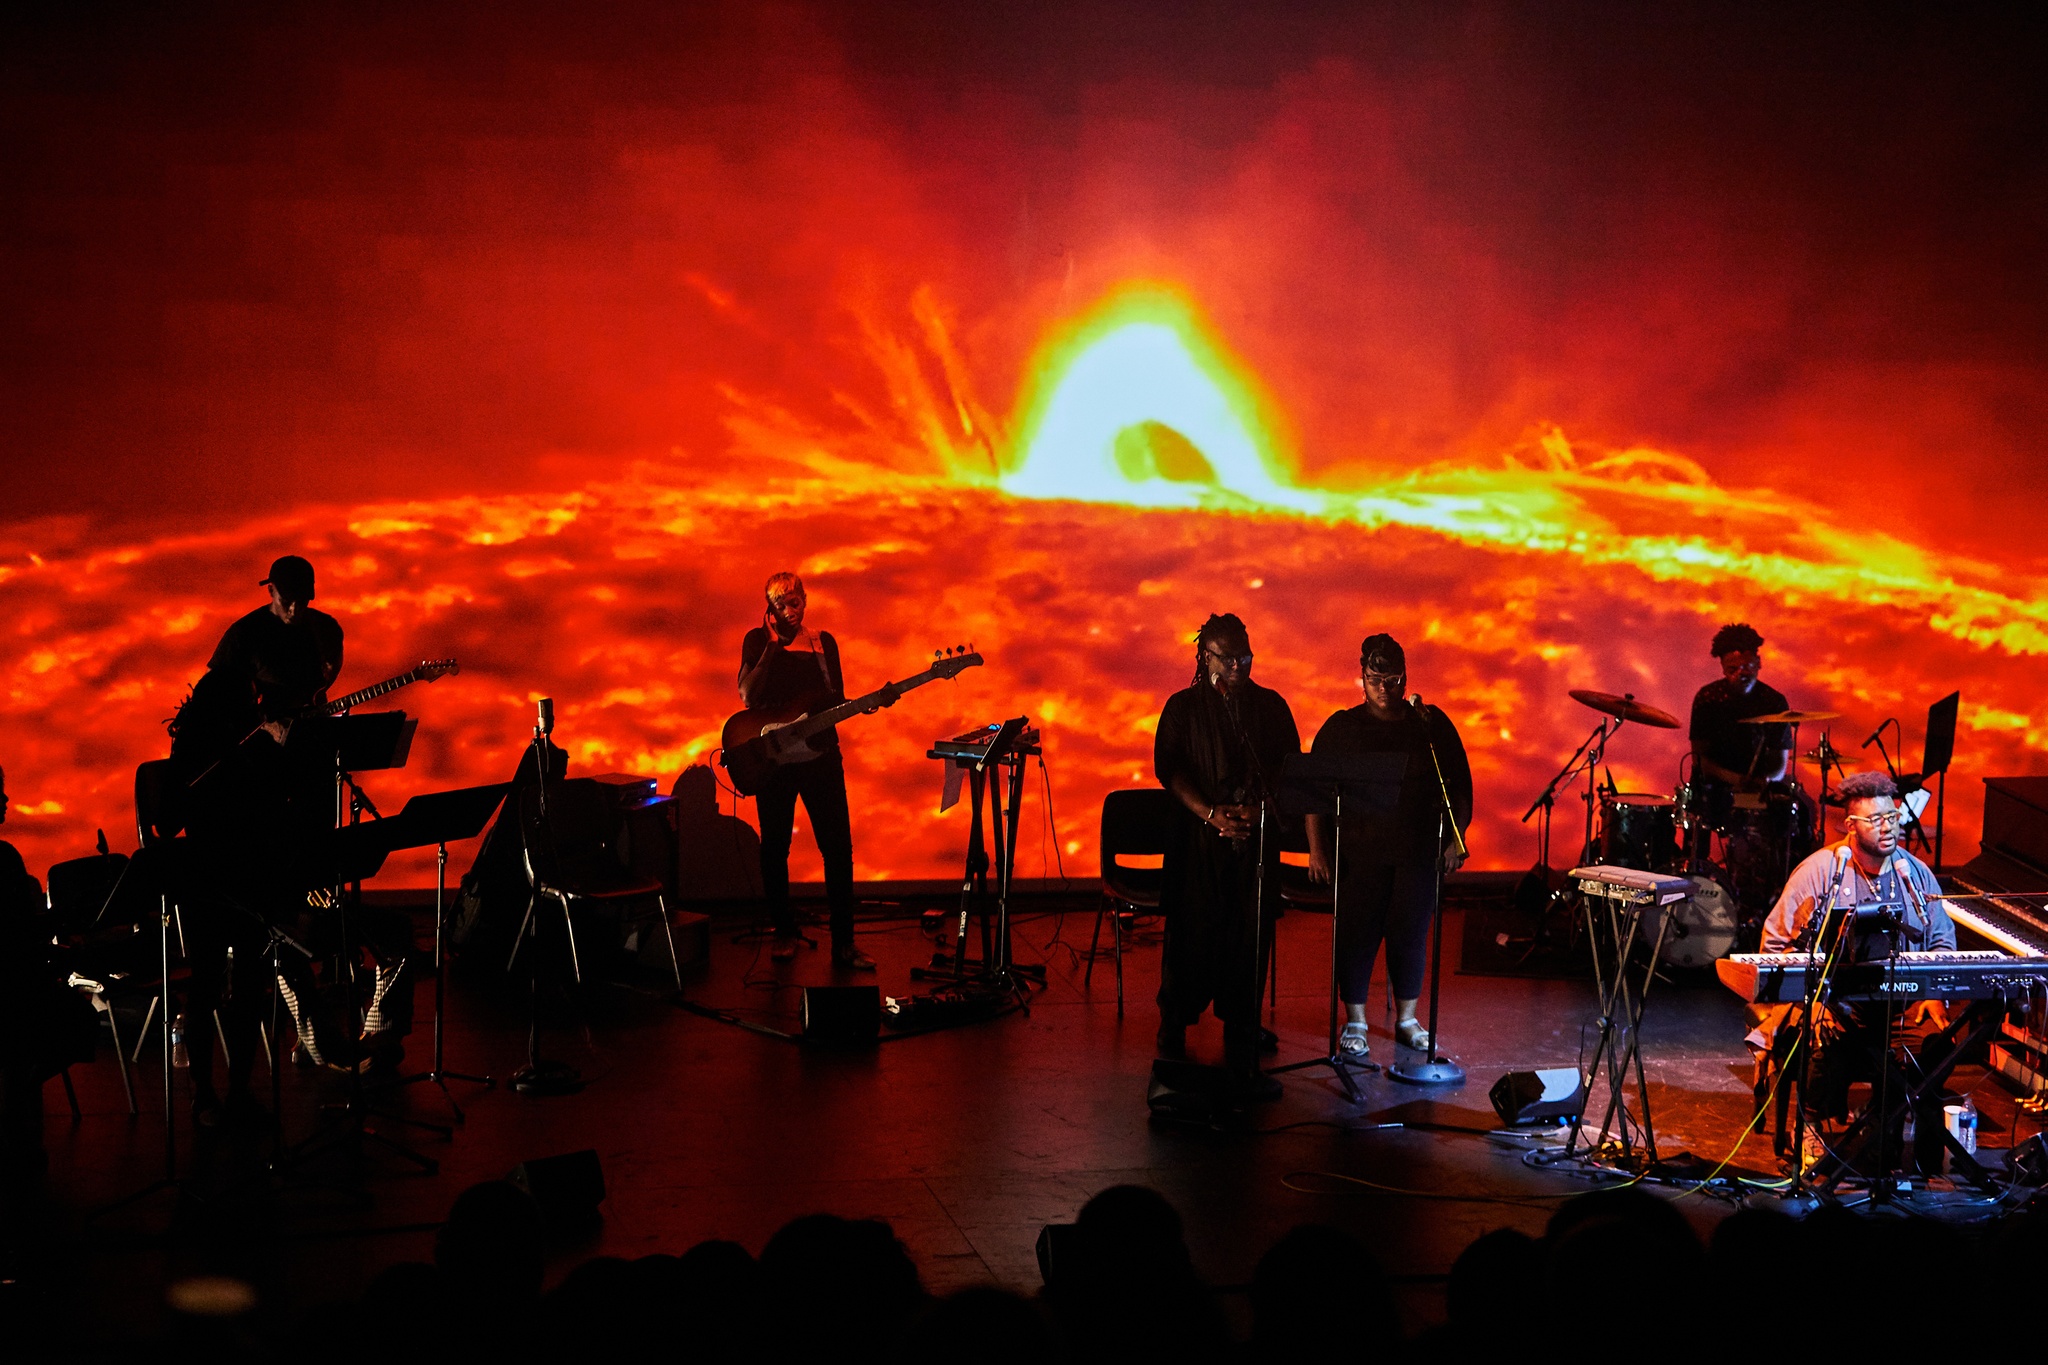 Band on stage performing in front of large screen of lava.